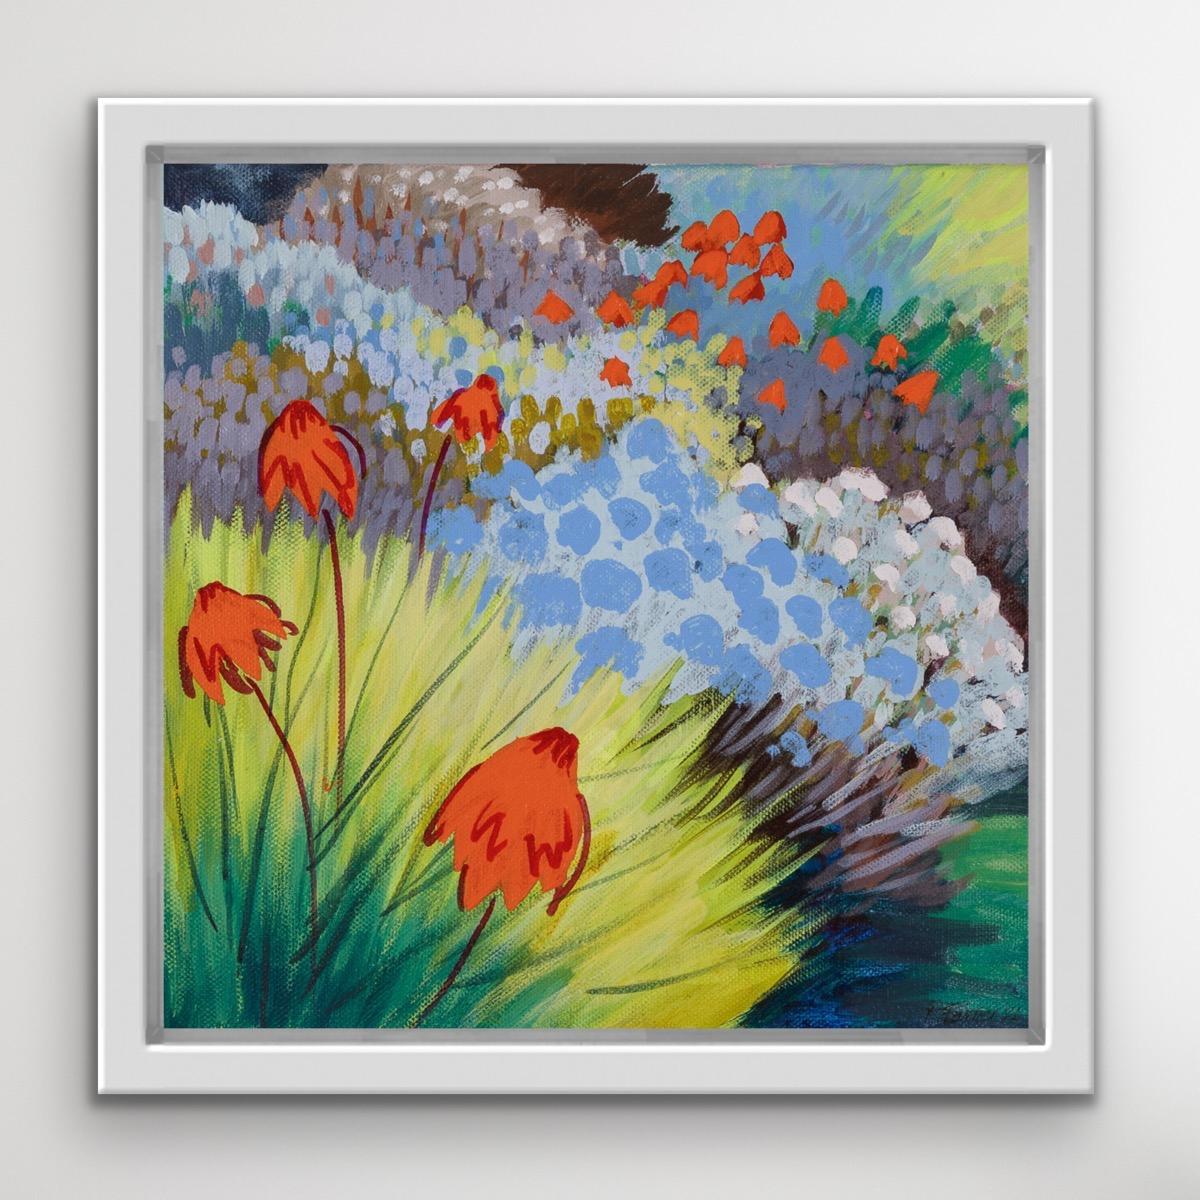 Orange Sparklers is an original painting by Rosemary Farrer. Painted on a warm glowing day in late summer orange flowers dance through the border, floating over the cooler greys, greens and blues. The rich jewel colours express the peak of late